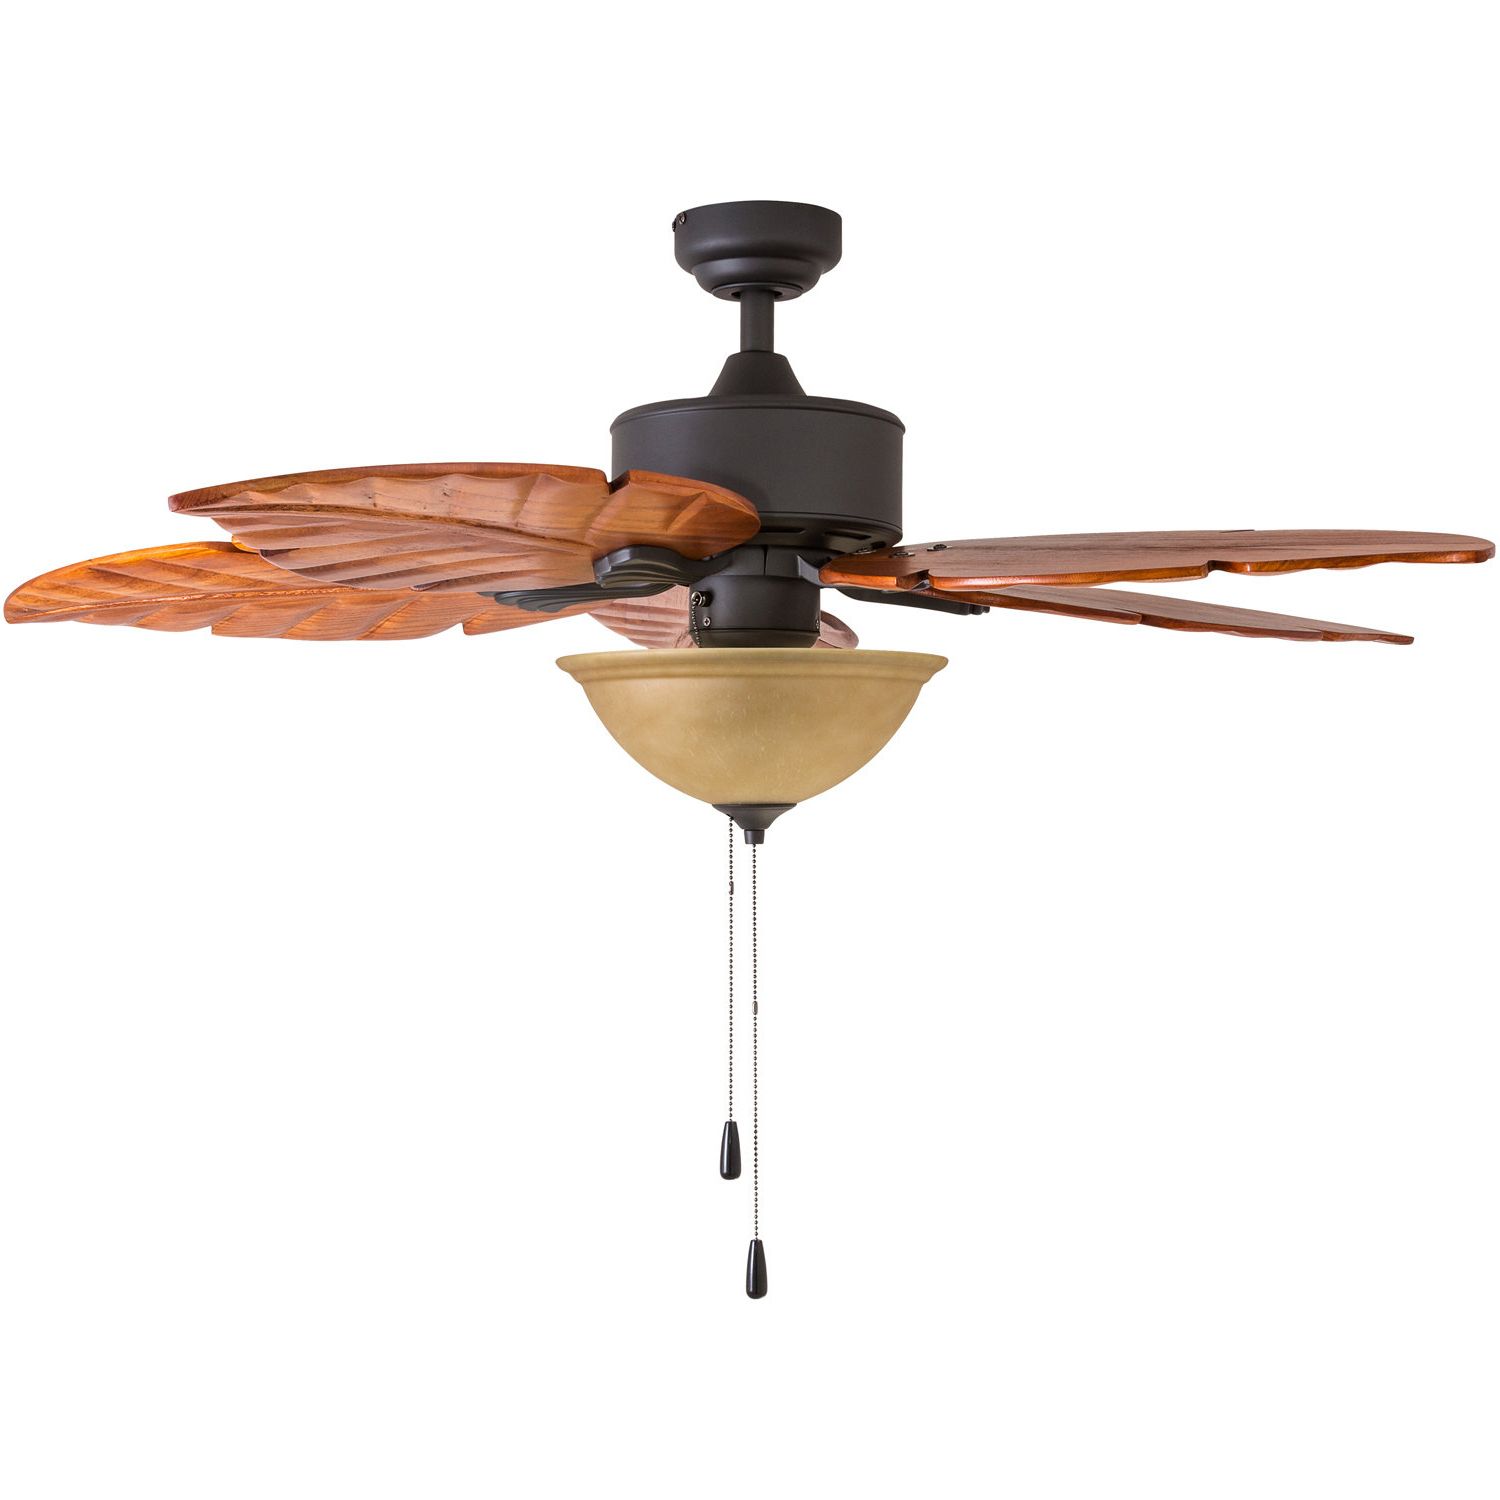 Farmhouse & Rustic Bayou Breeze Ceiling Fans (View 5 of 20)